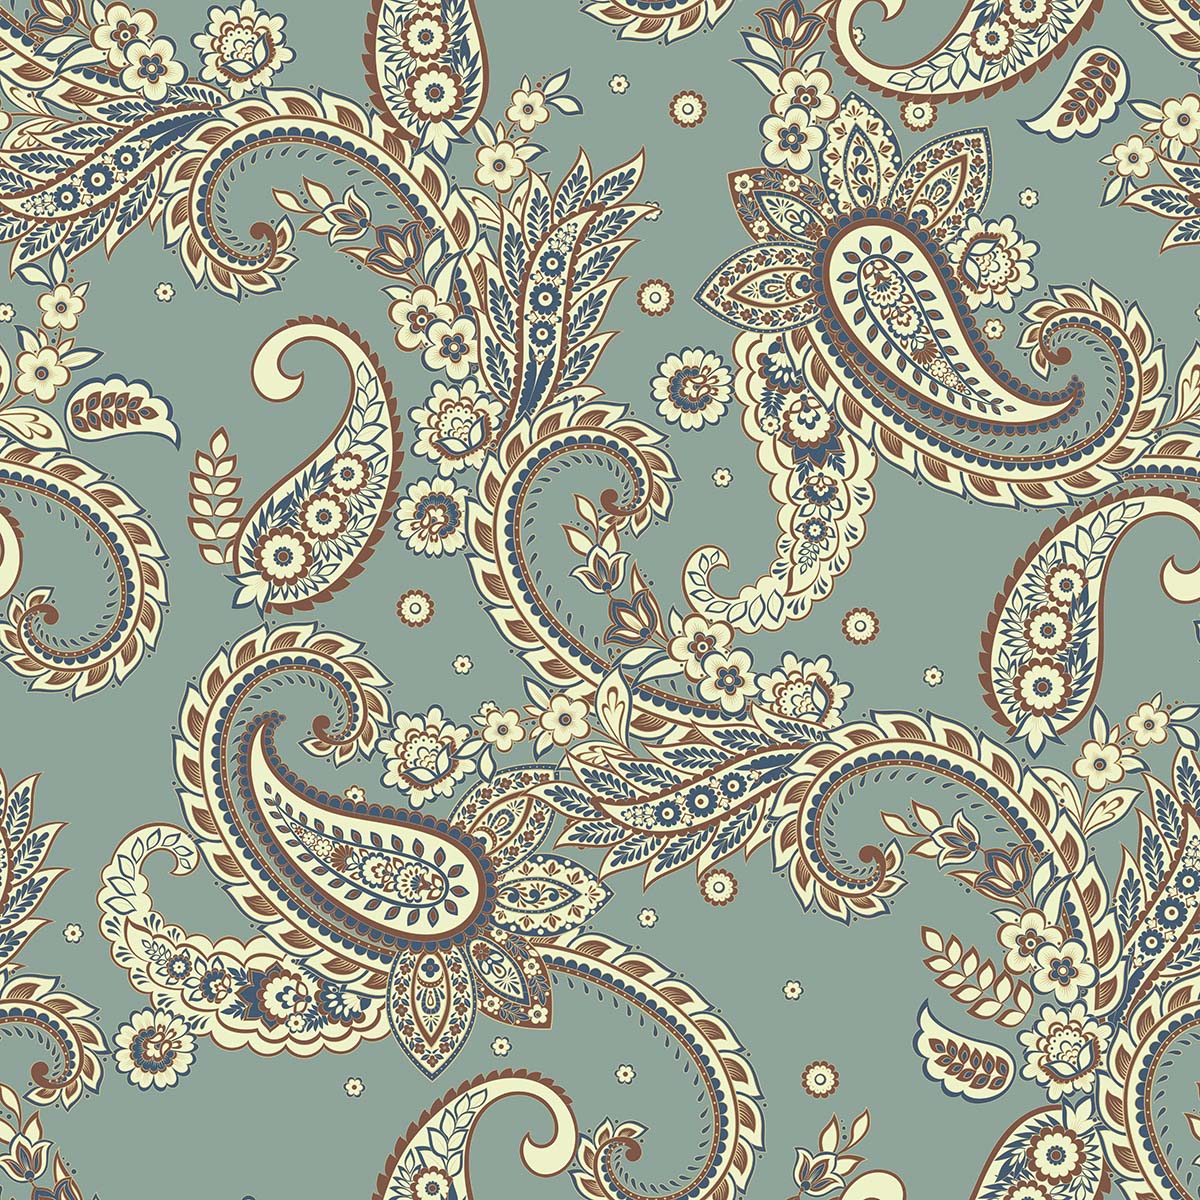 A pattern of paisley and flowers